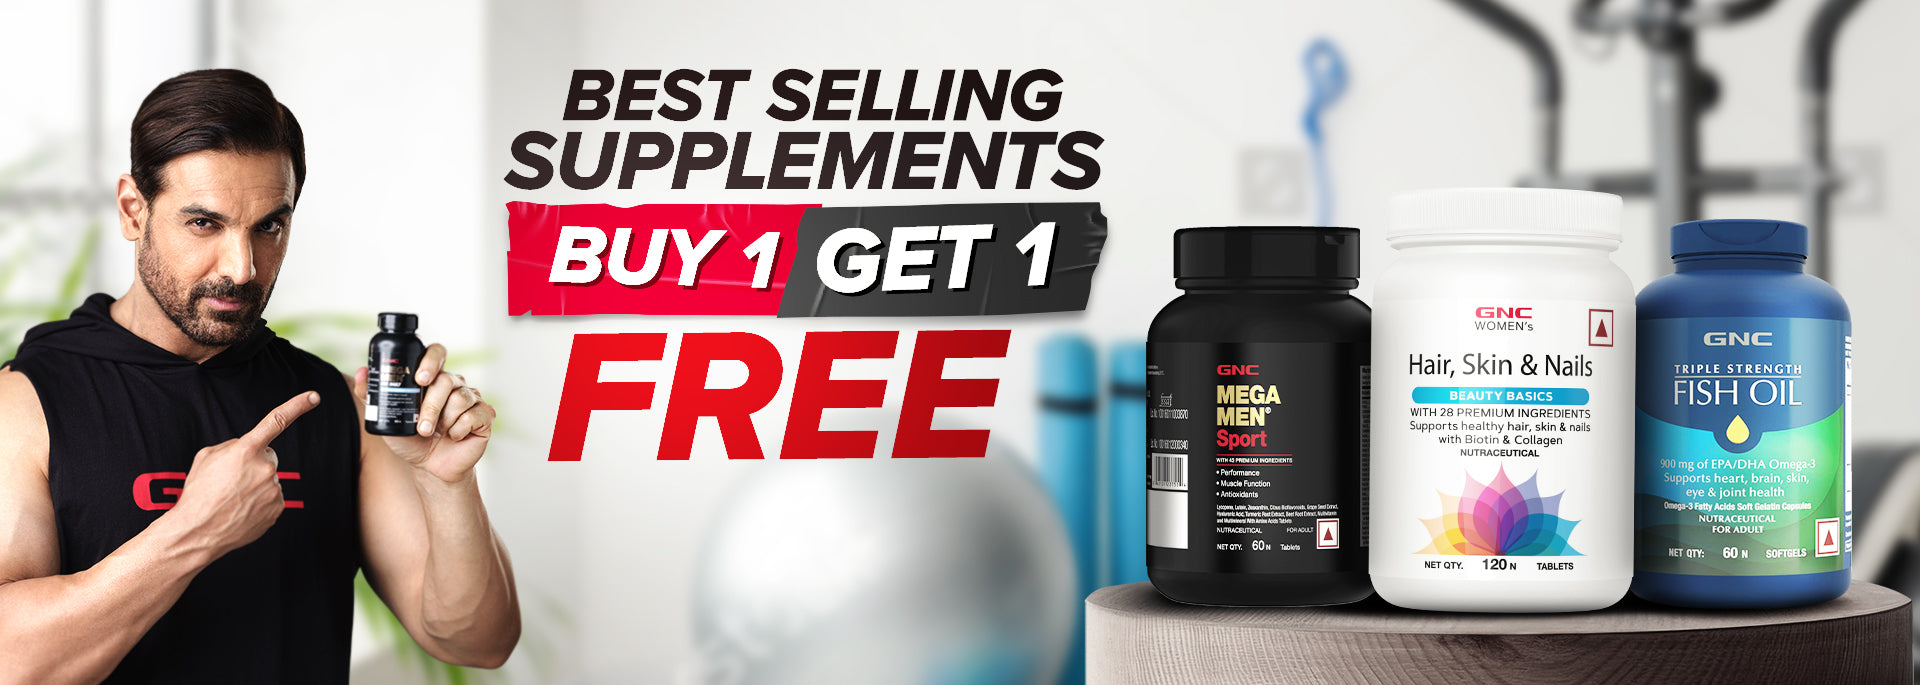 GNC Buy 1 Get 1 Free - Best Selling Supplements